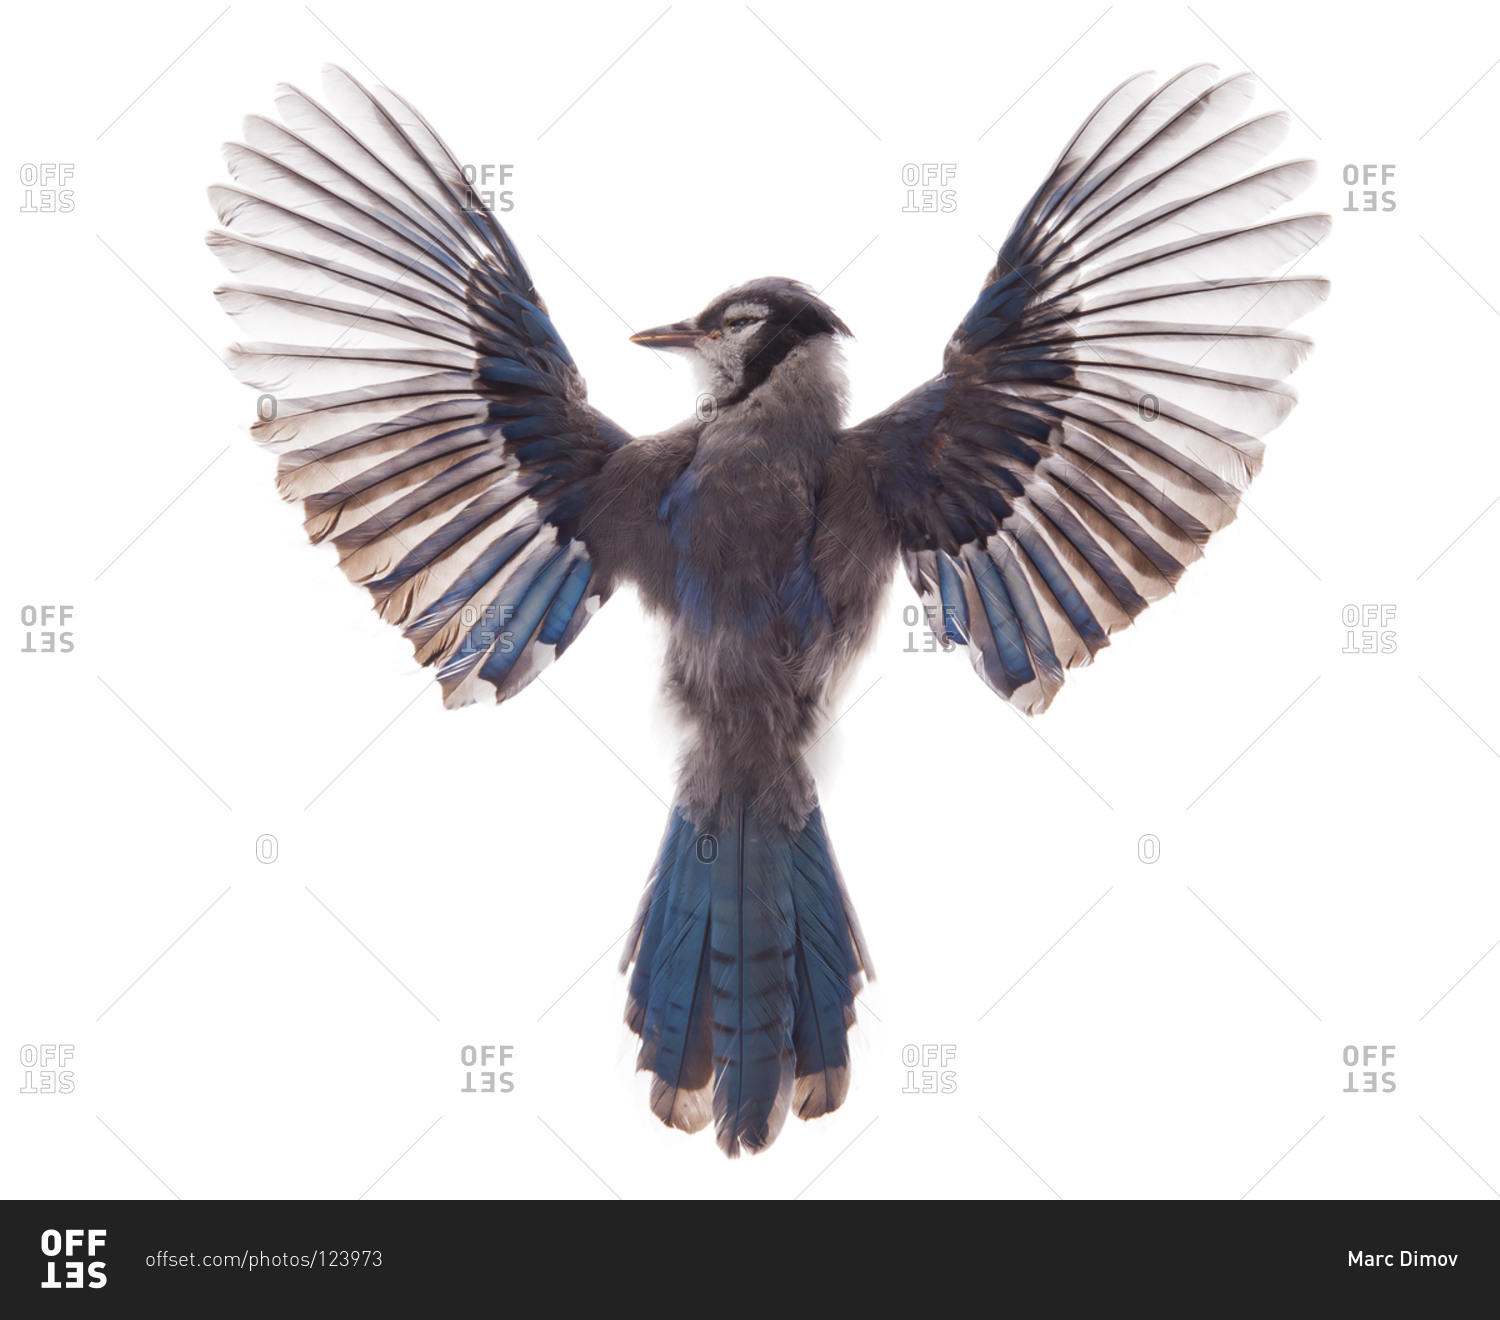 A deseased Blue Jay with its wings spread stock photo - OFFSET